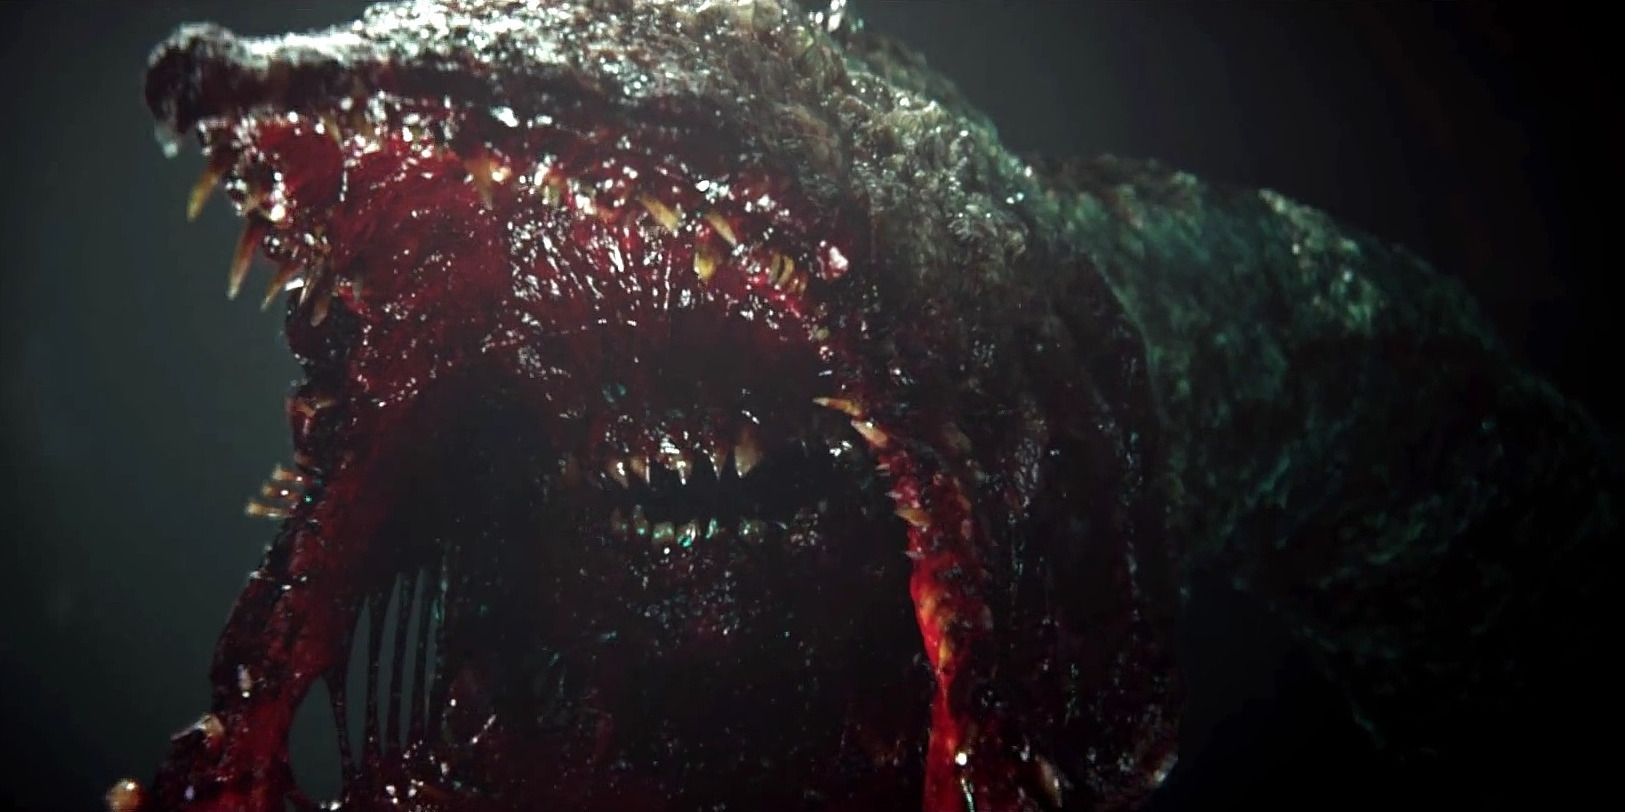 Front View of the Gravemind